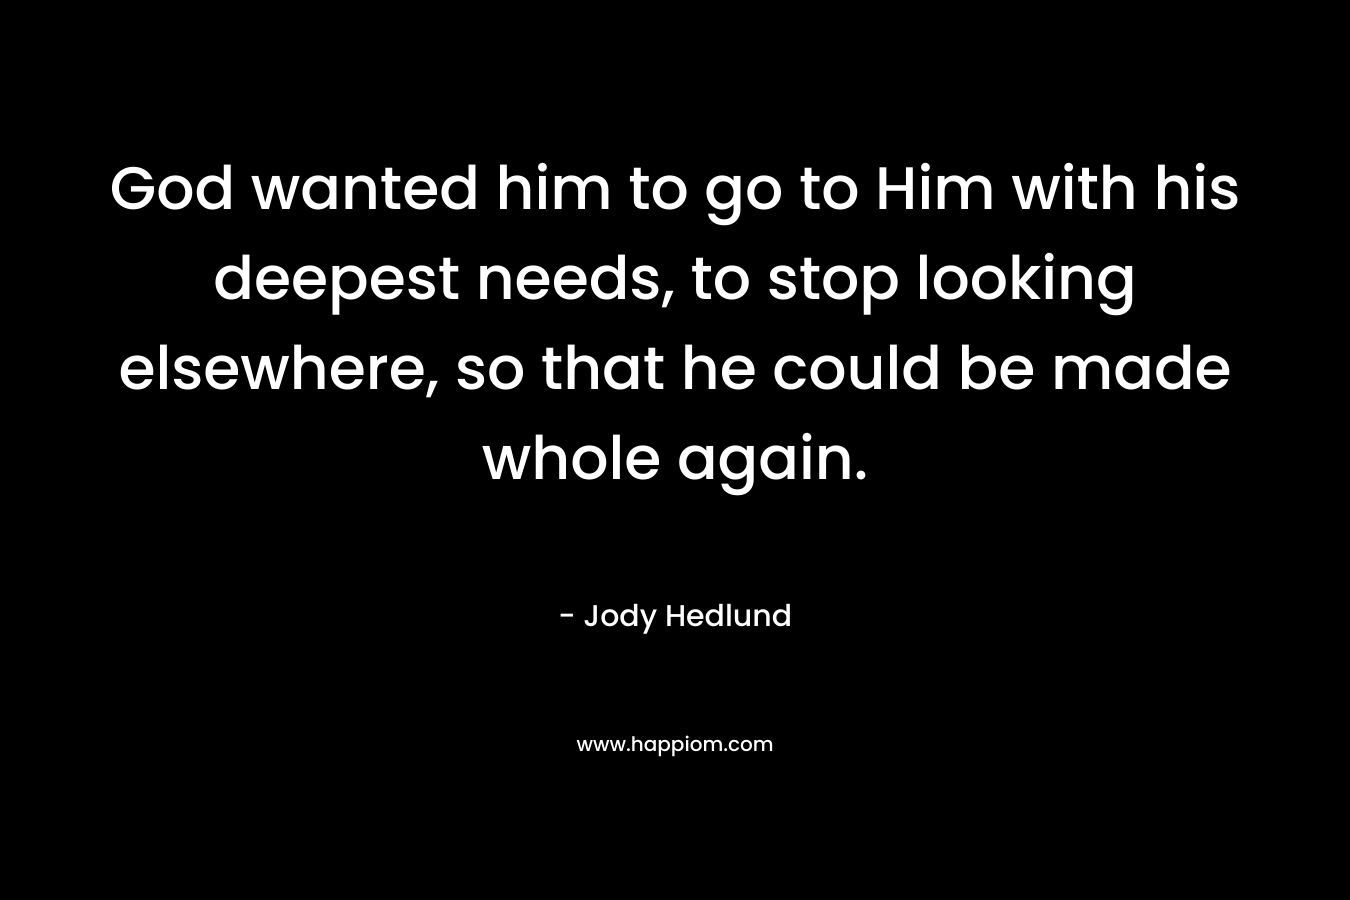 God wanted him to go to Him with his deepest needs, to stop looking elsewhere, so that he could be made whole again.